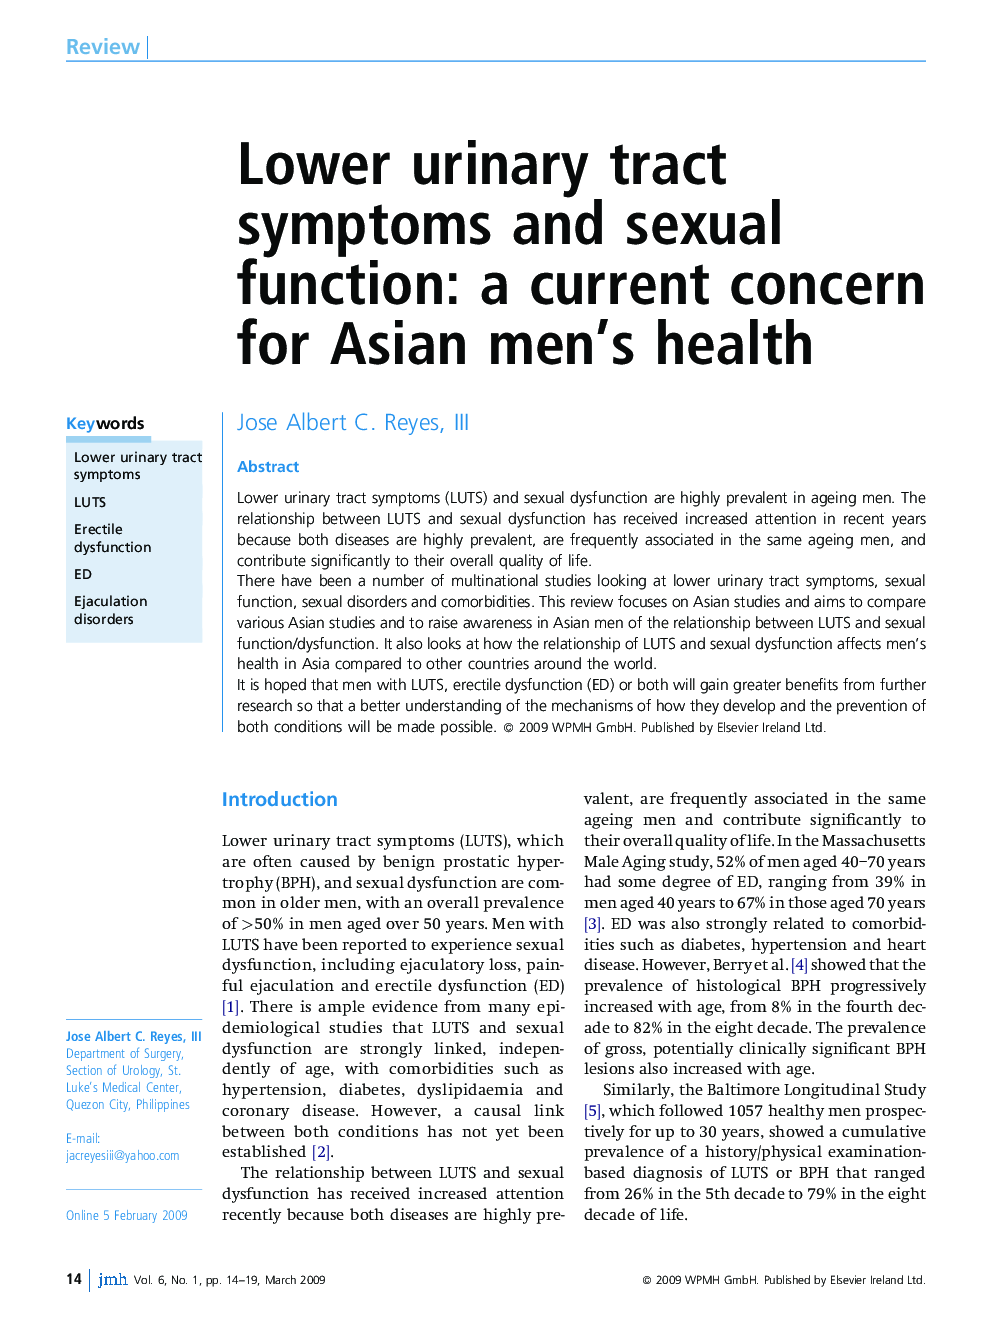 Lower urinary tract symptoms and sexual function: a current concern for Asian men's health